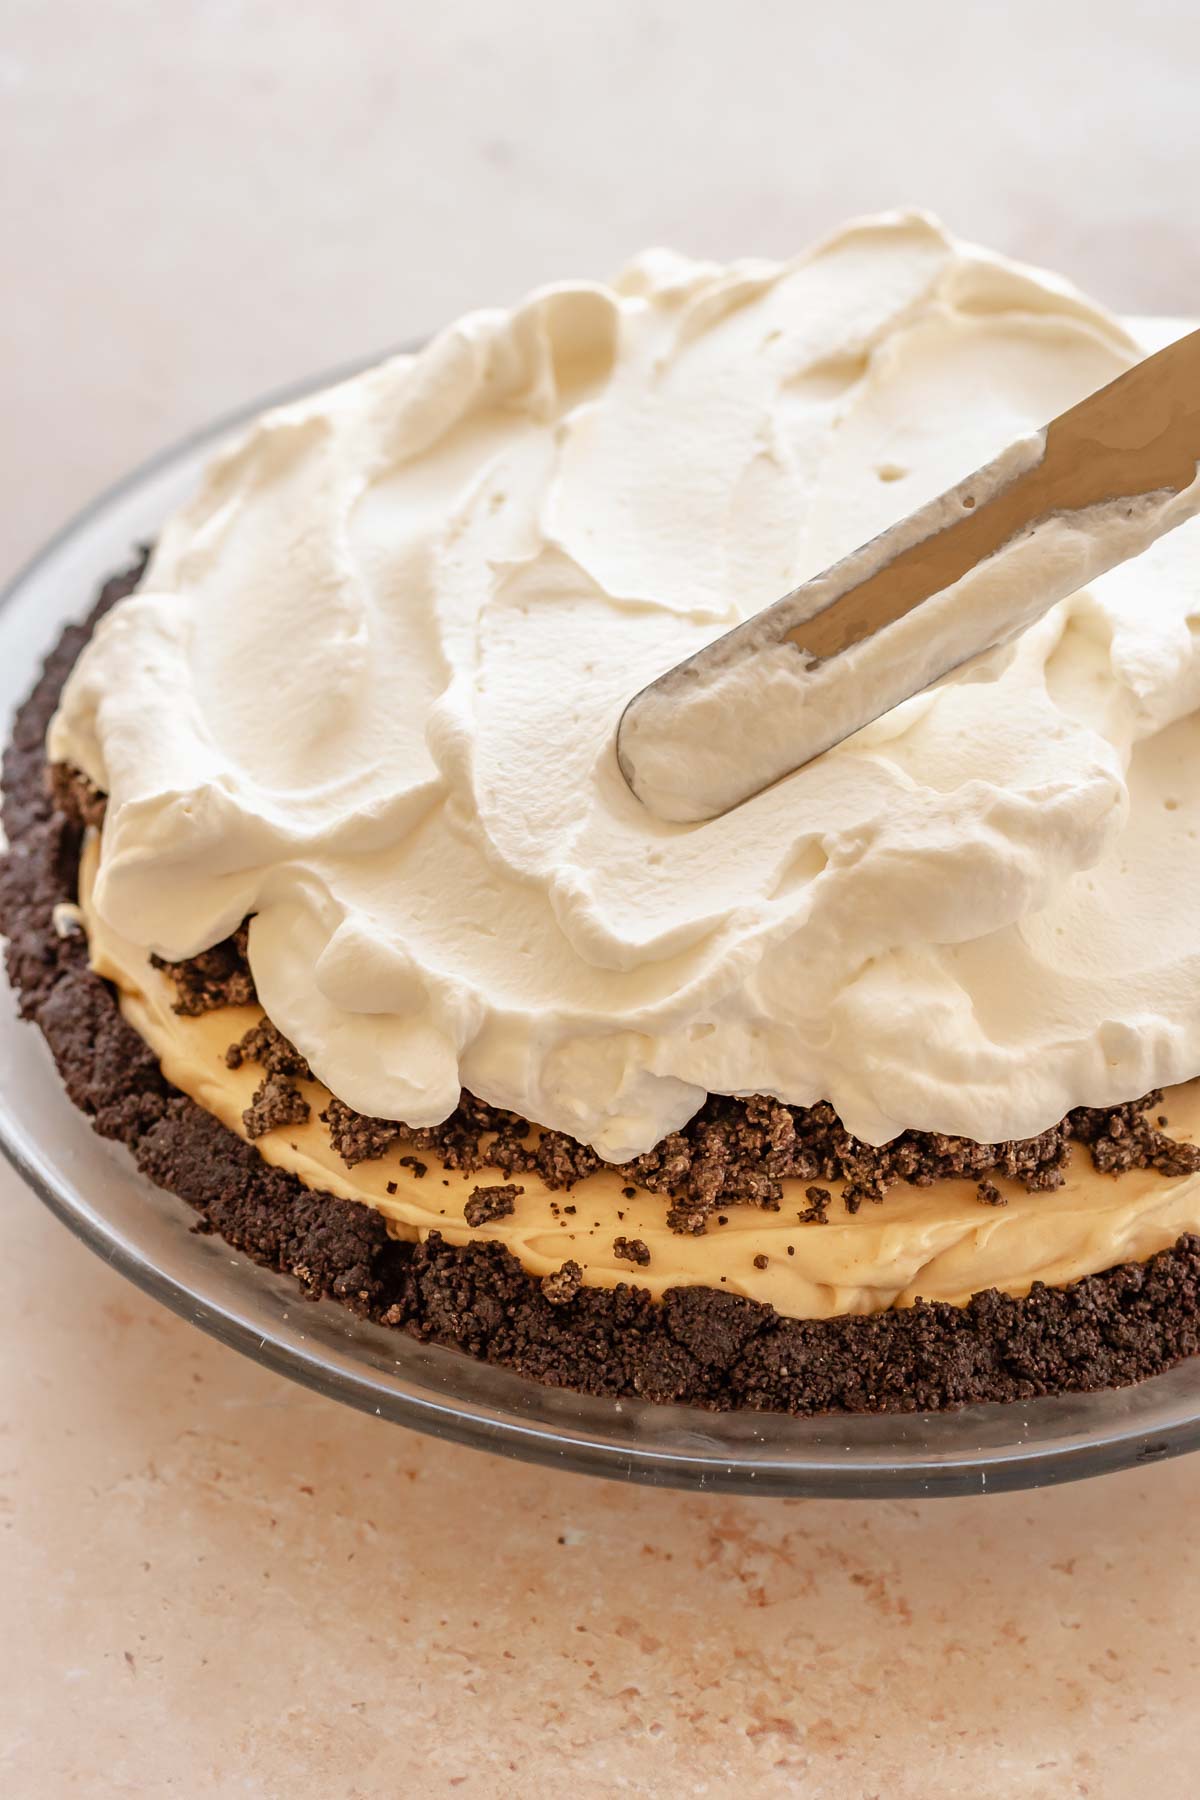 An offset spatula spreads whipped cream on top of the pie.